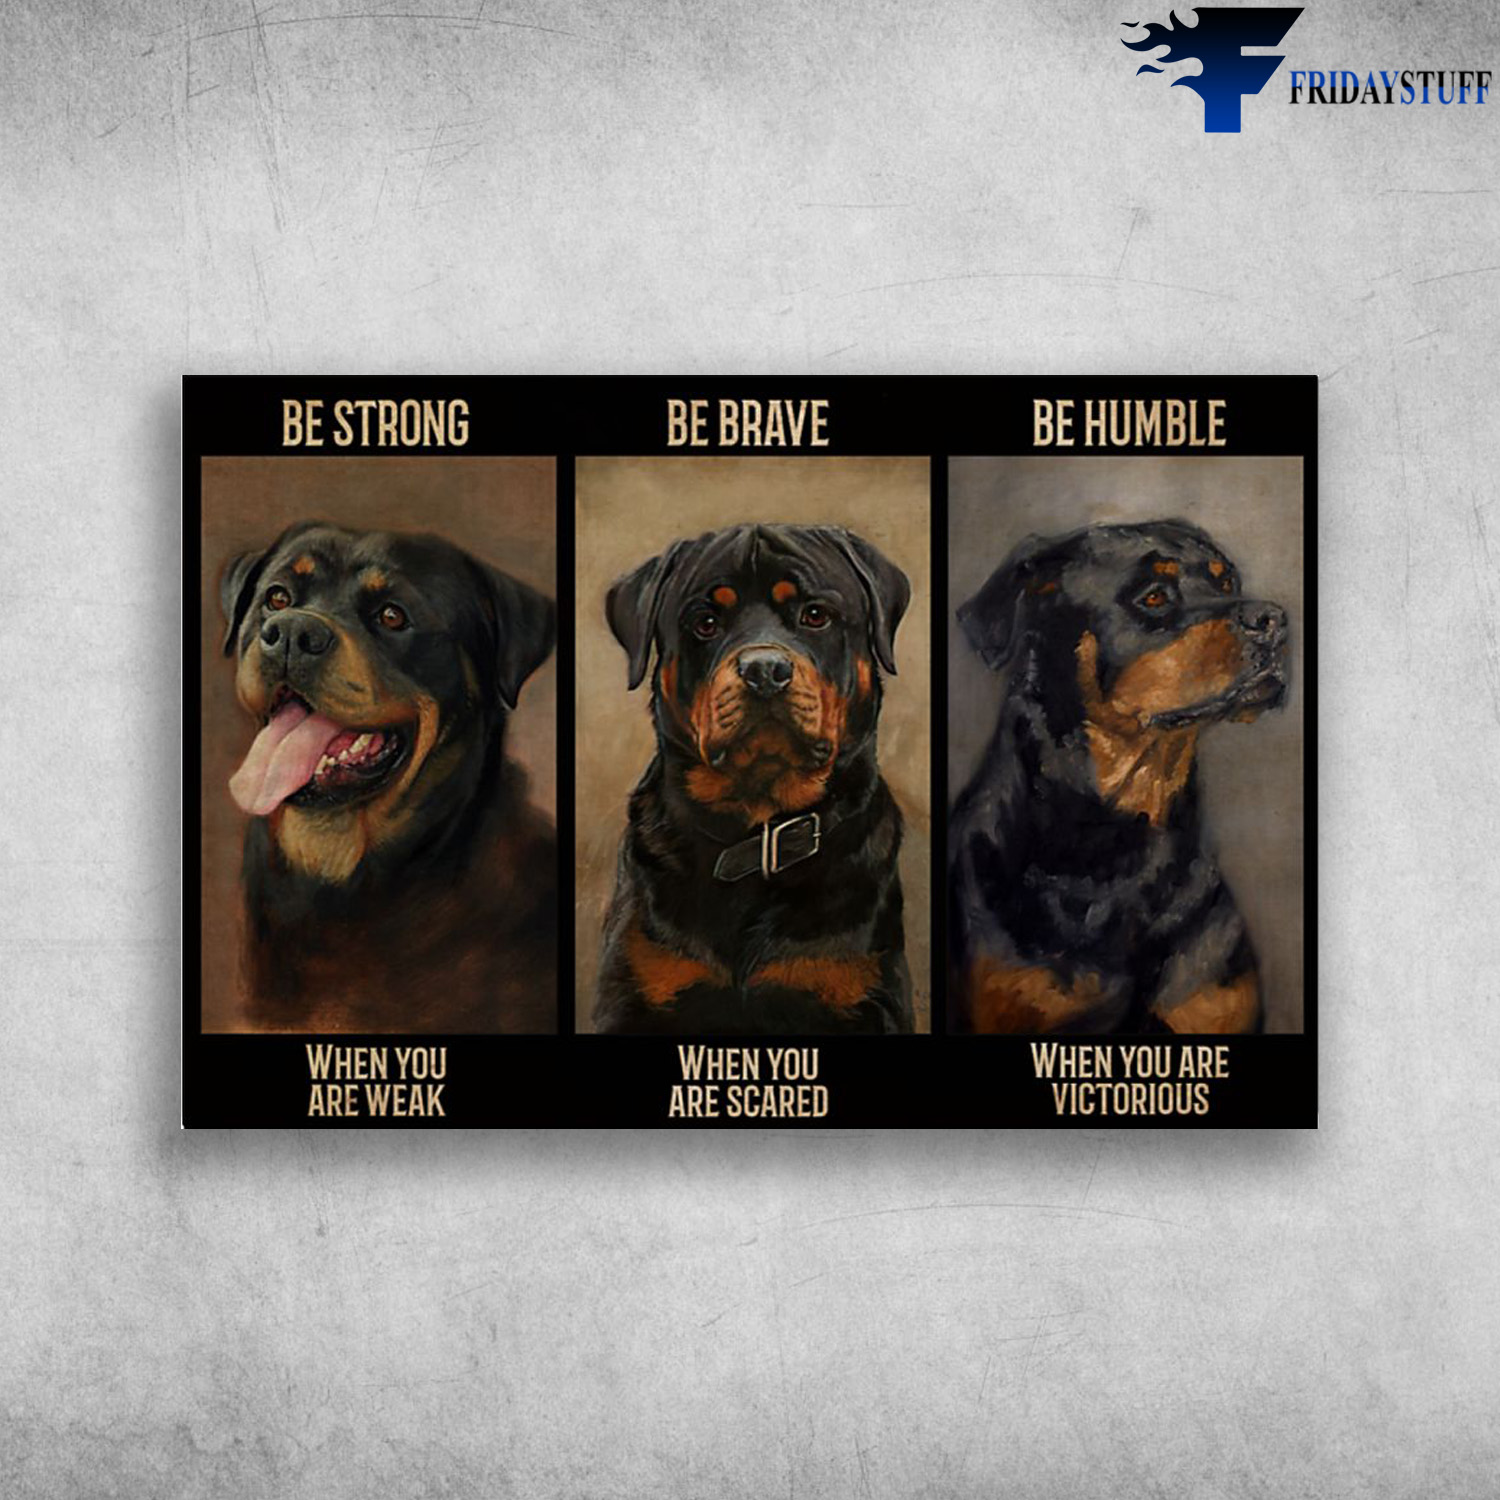 Rottweiler Dog - Be Strong When You Are Weak, Be Brave When You Are Scared, Be Humble When You Are Victorious